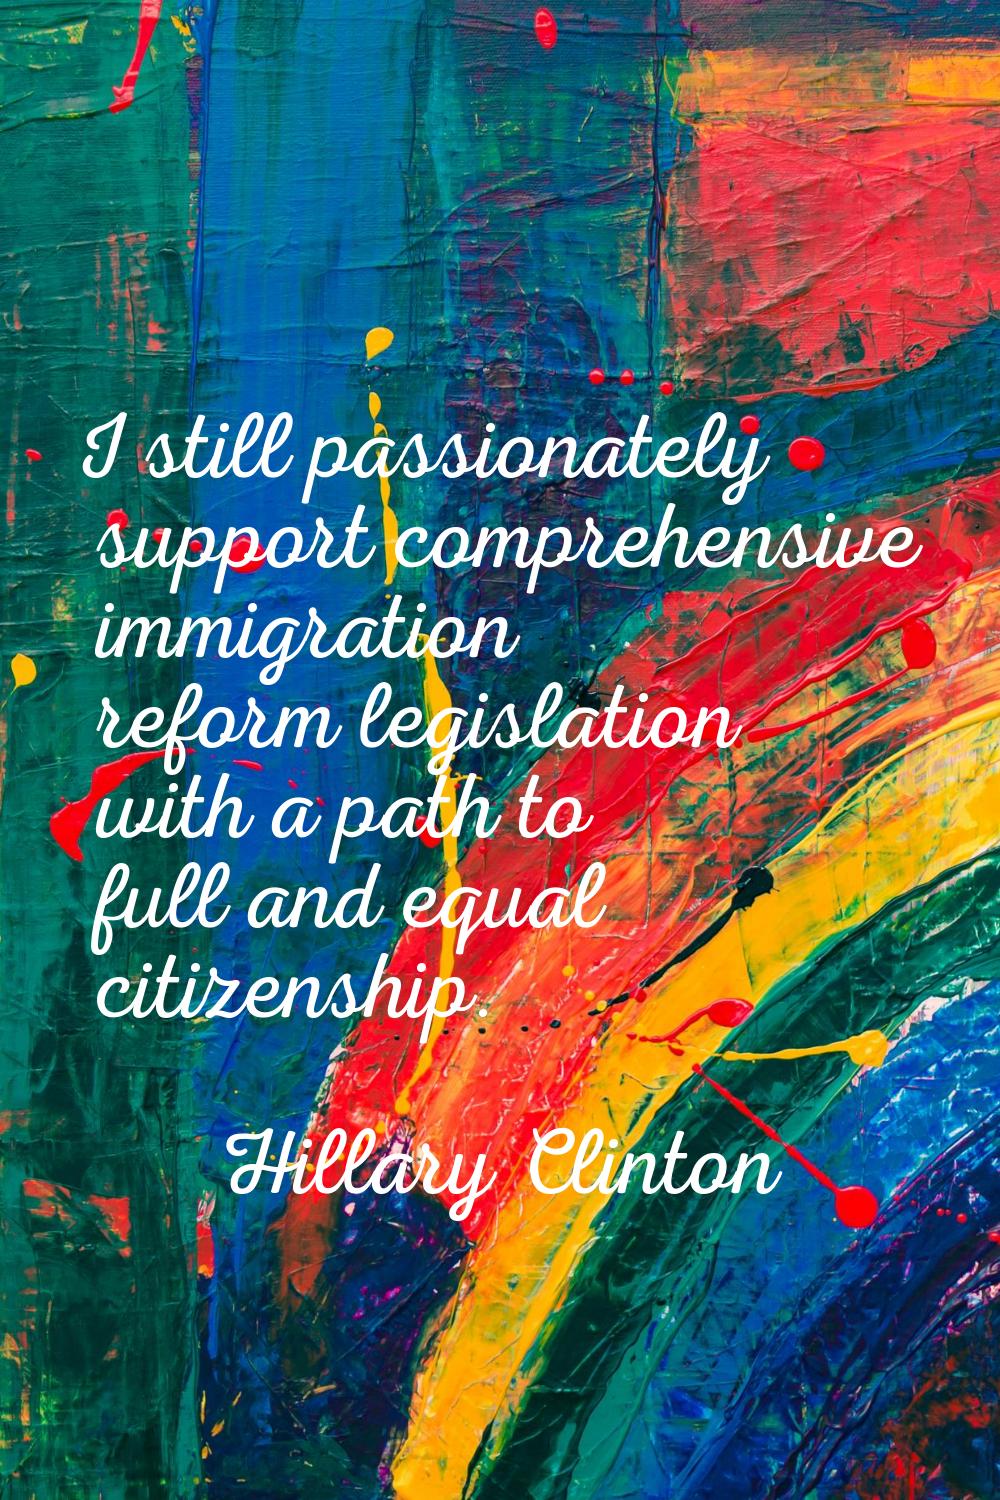 I still passionately support comprehensive immigration reform legislation with a path to full and e